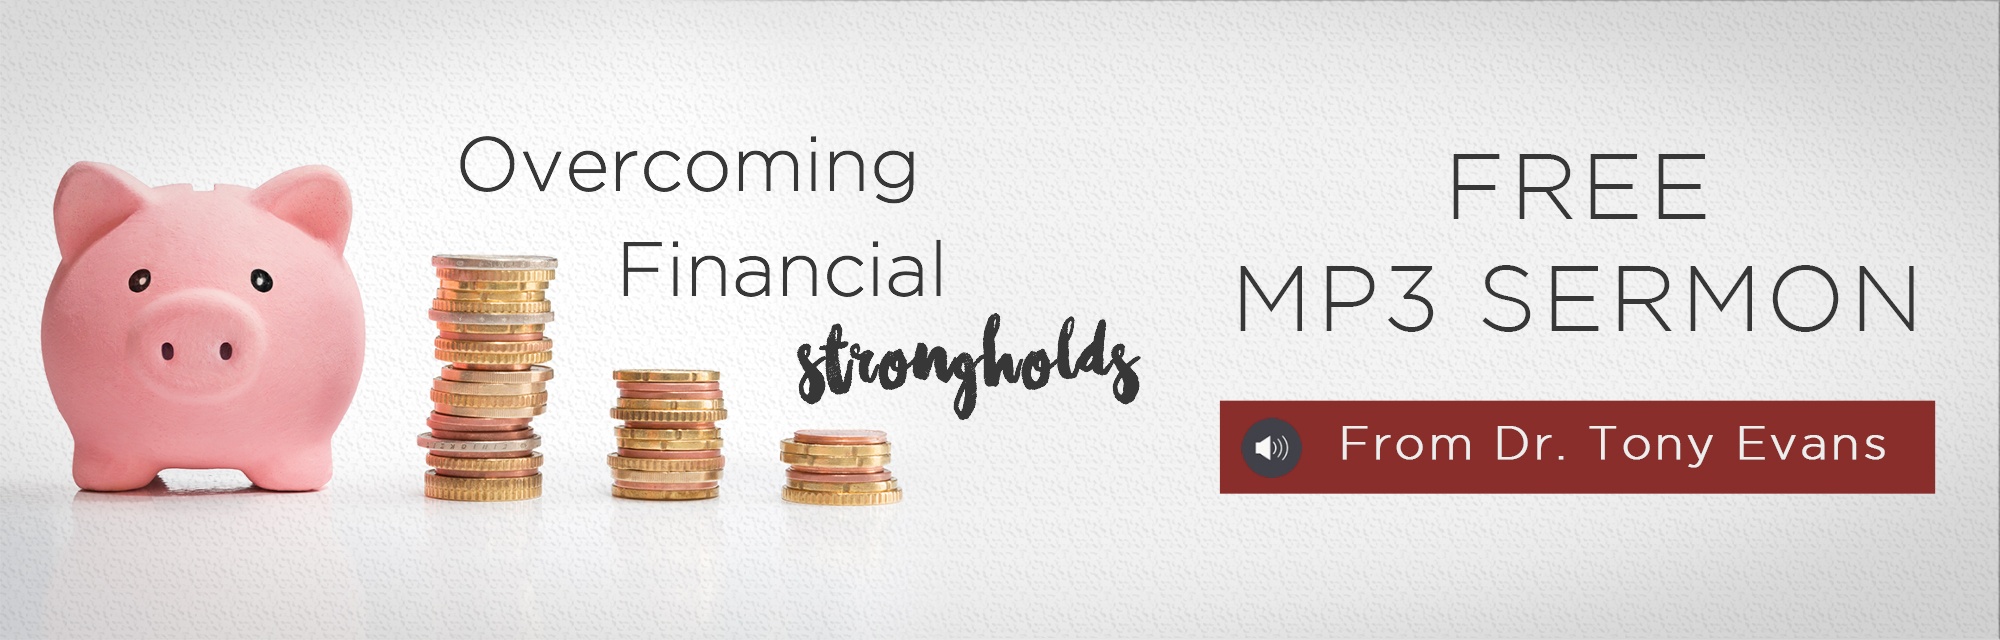 Overcoming Financial Strongholds MP3